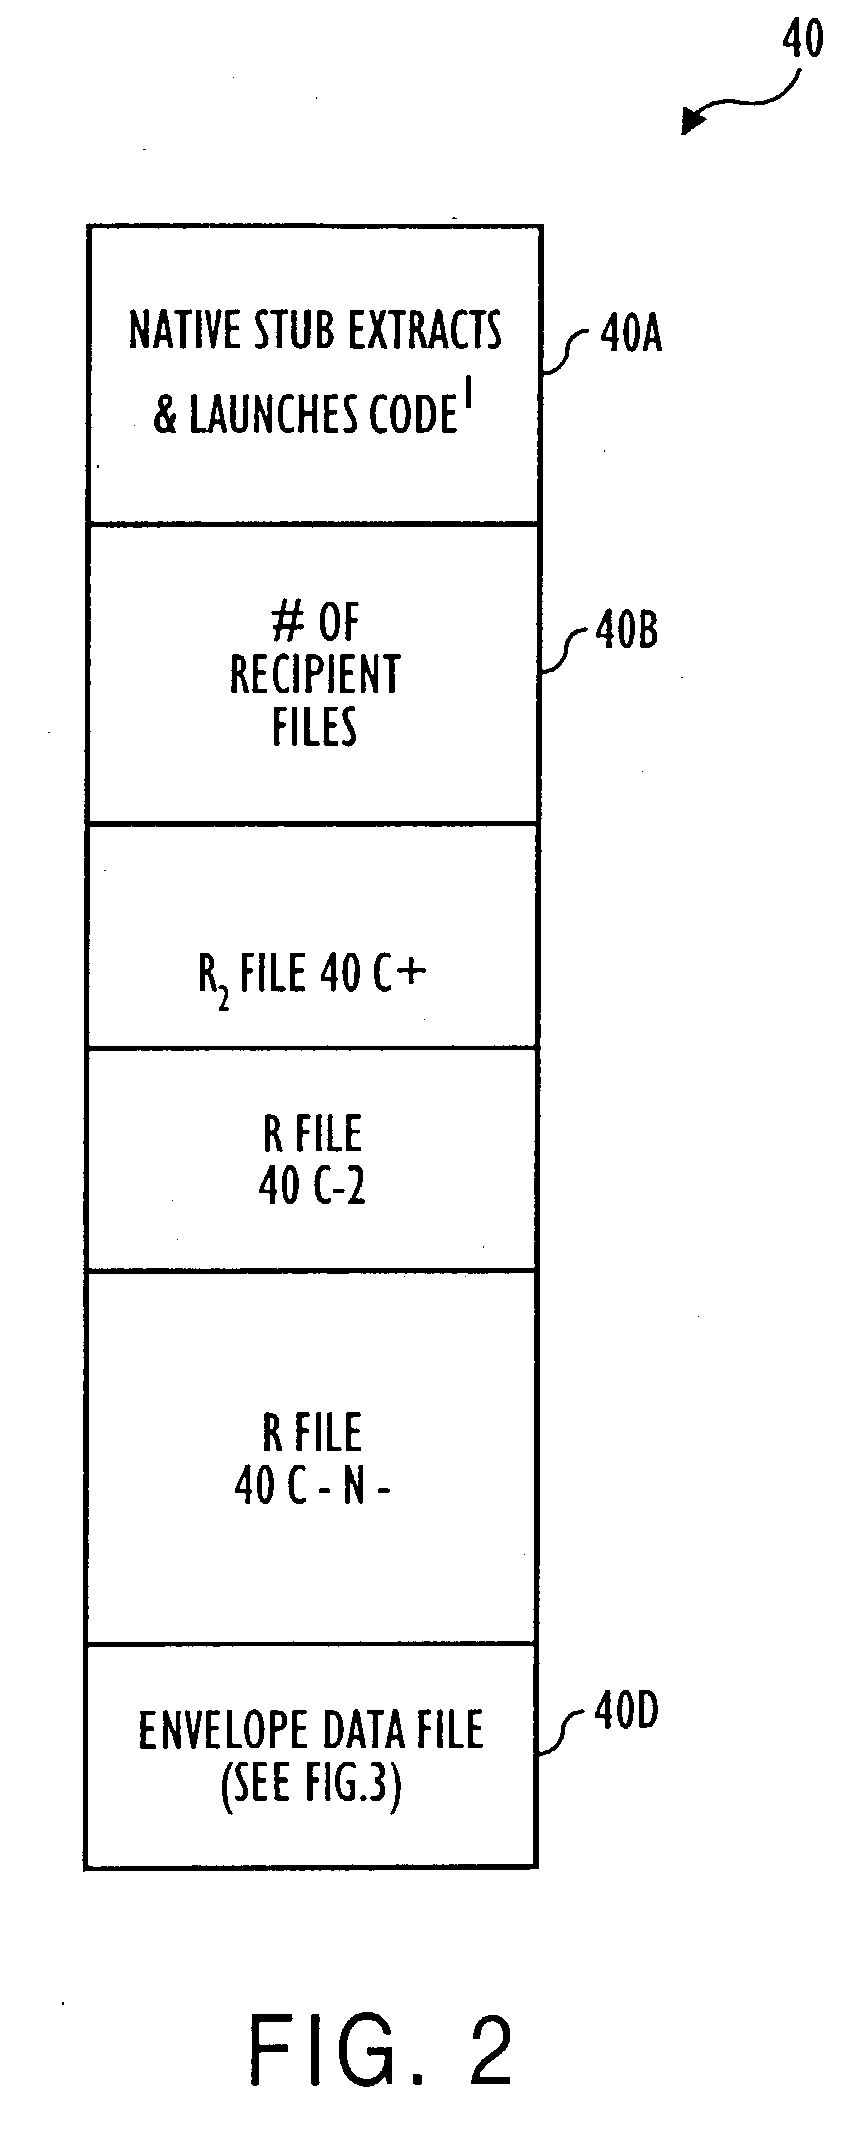 E-mail program capable of transmitting, opening and presenting a container having digital content using embedded executable software